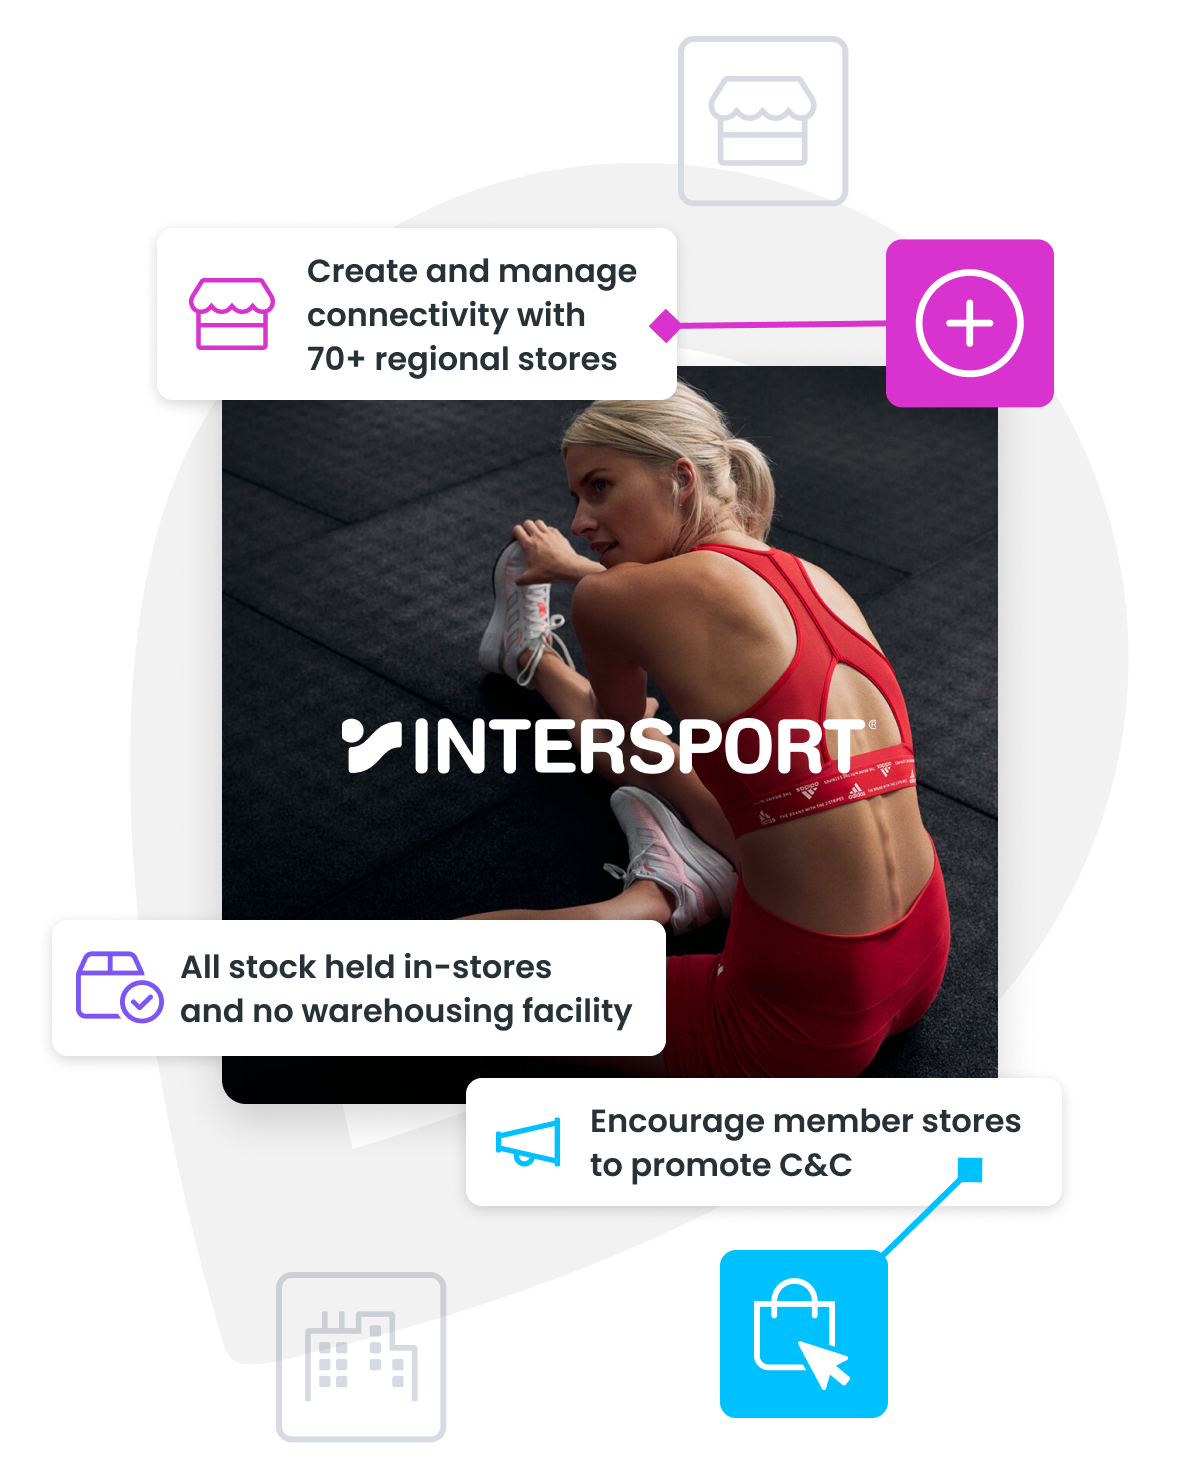 Intersport Australia had significant challenges that stockinstore had to consider when building a custom Click & Collect solution.